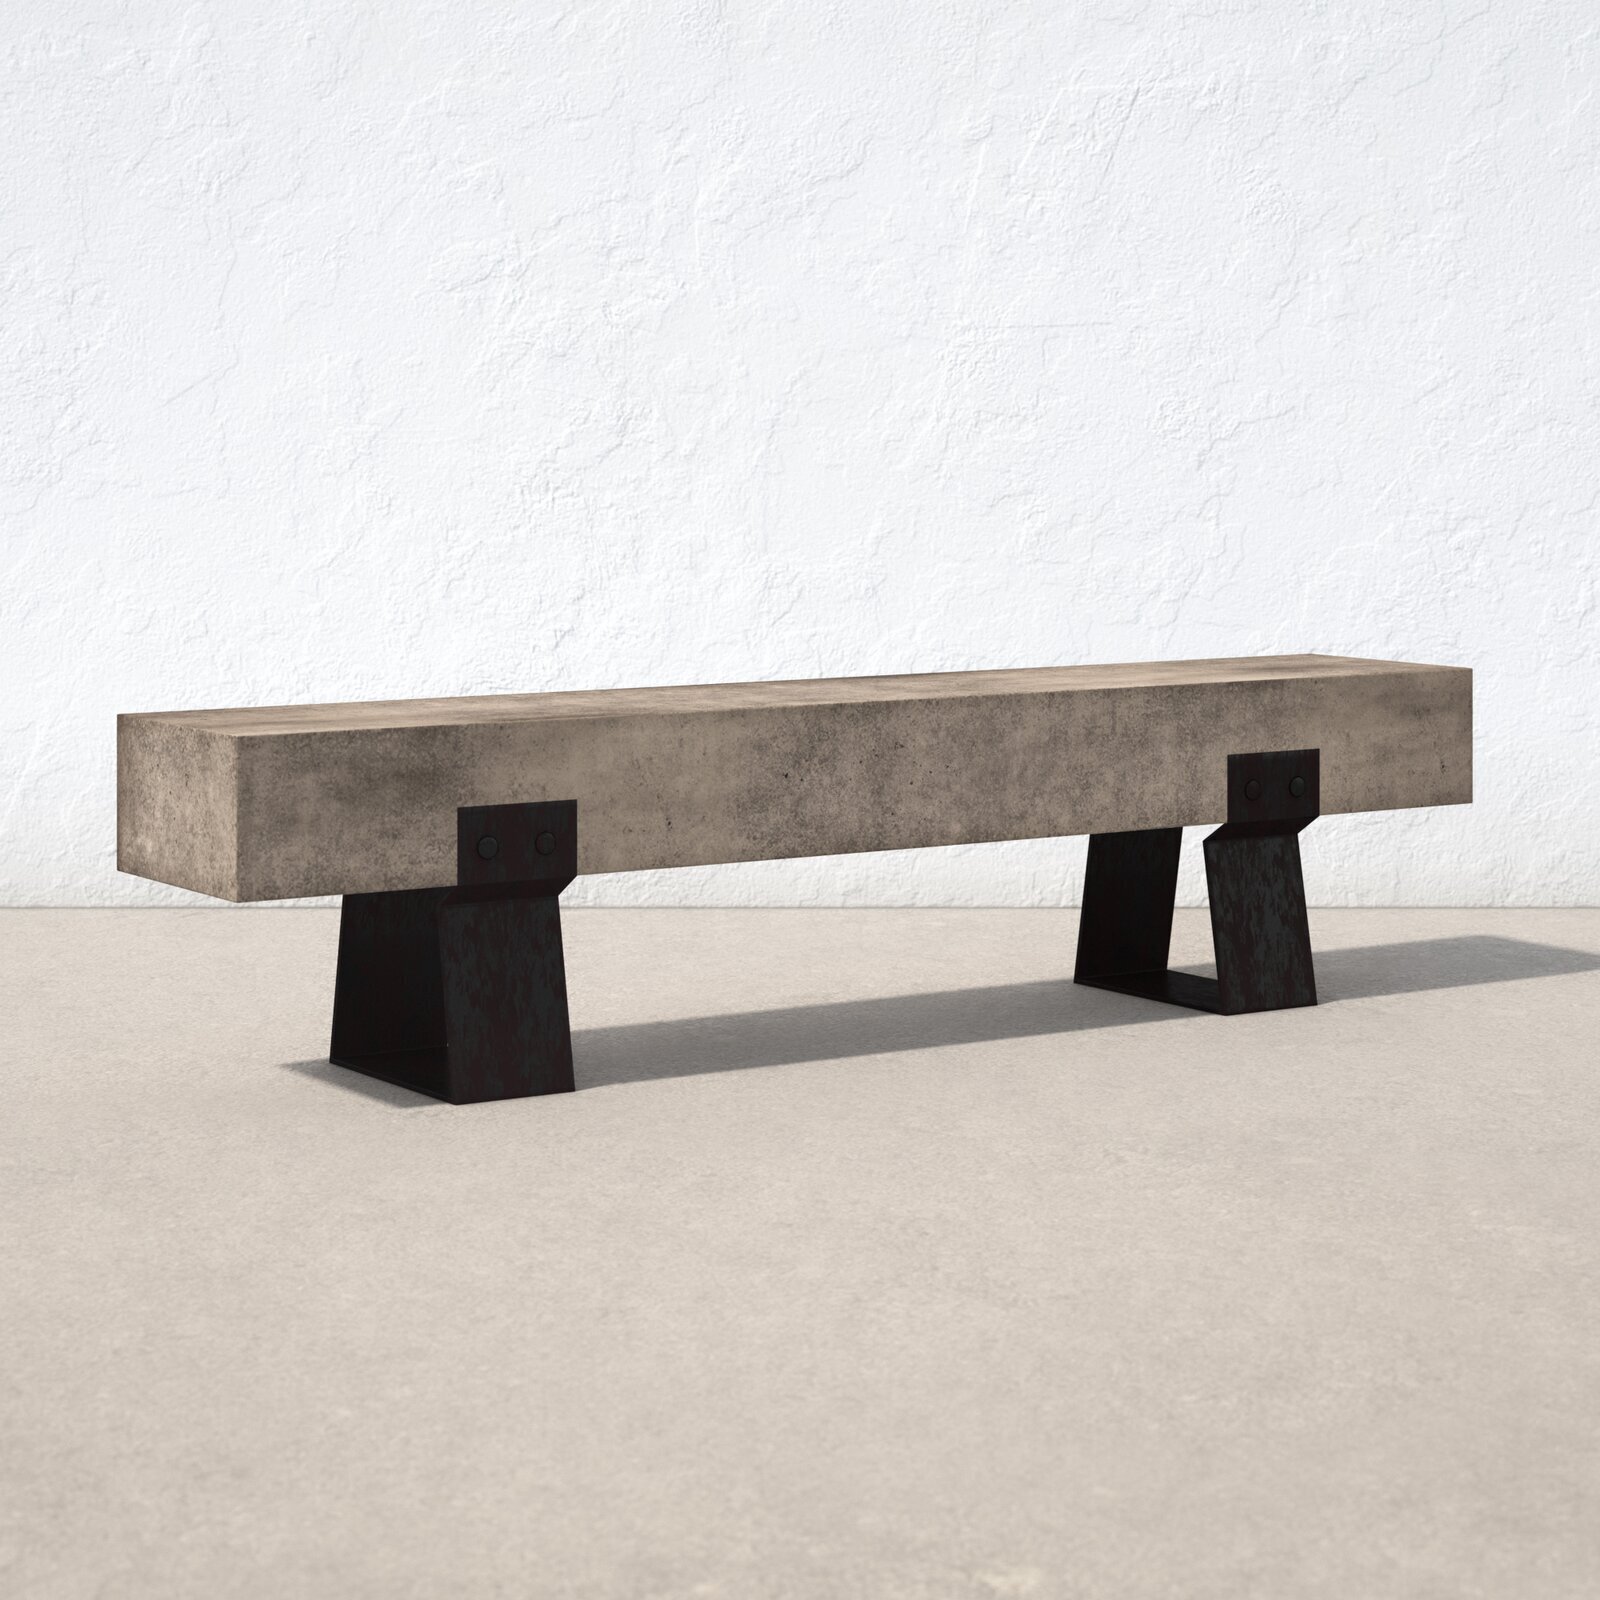 Intimidating Outdoor Concrete Bench